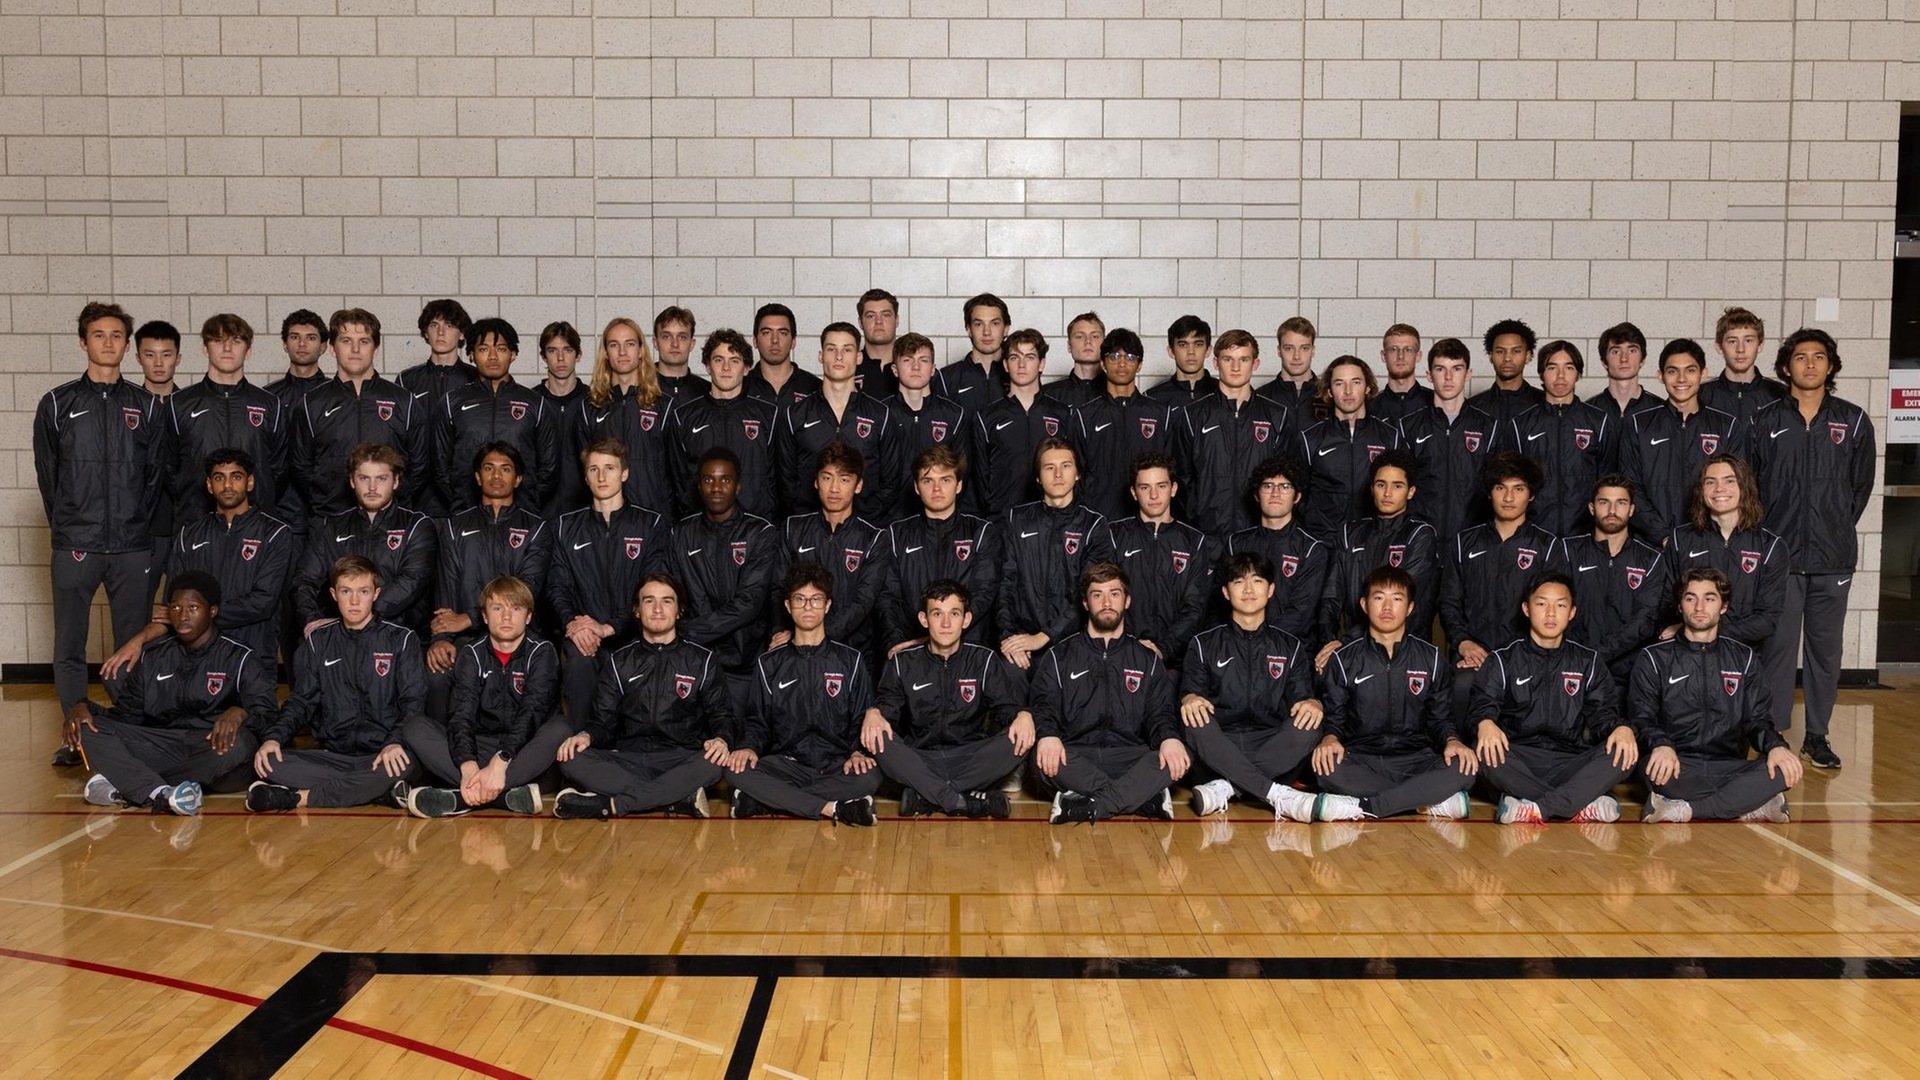 team photo of men's track and field team consisting of more than 60 people